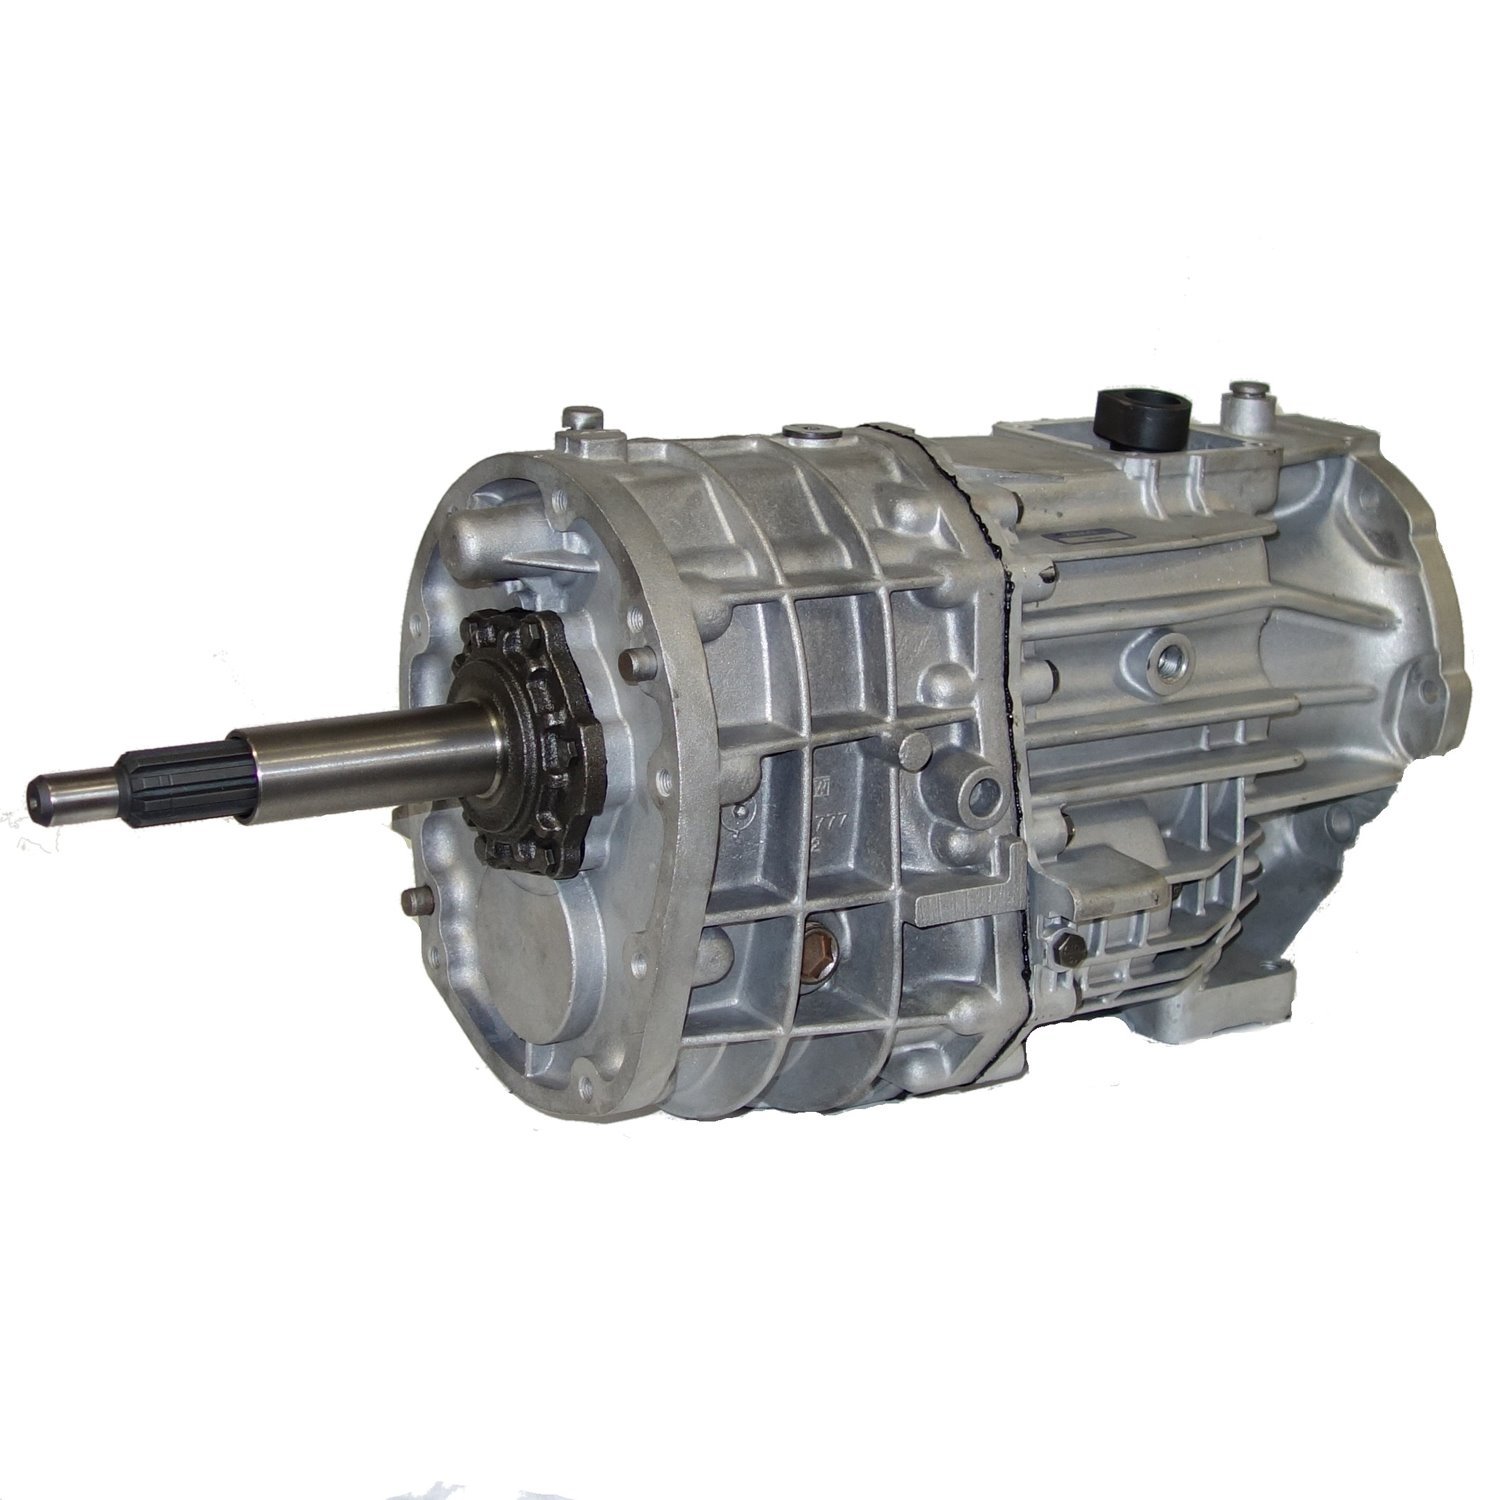 Remanufactured NV3550 Manual Transmission for Jeep 02-04 Liberty,